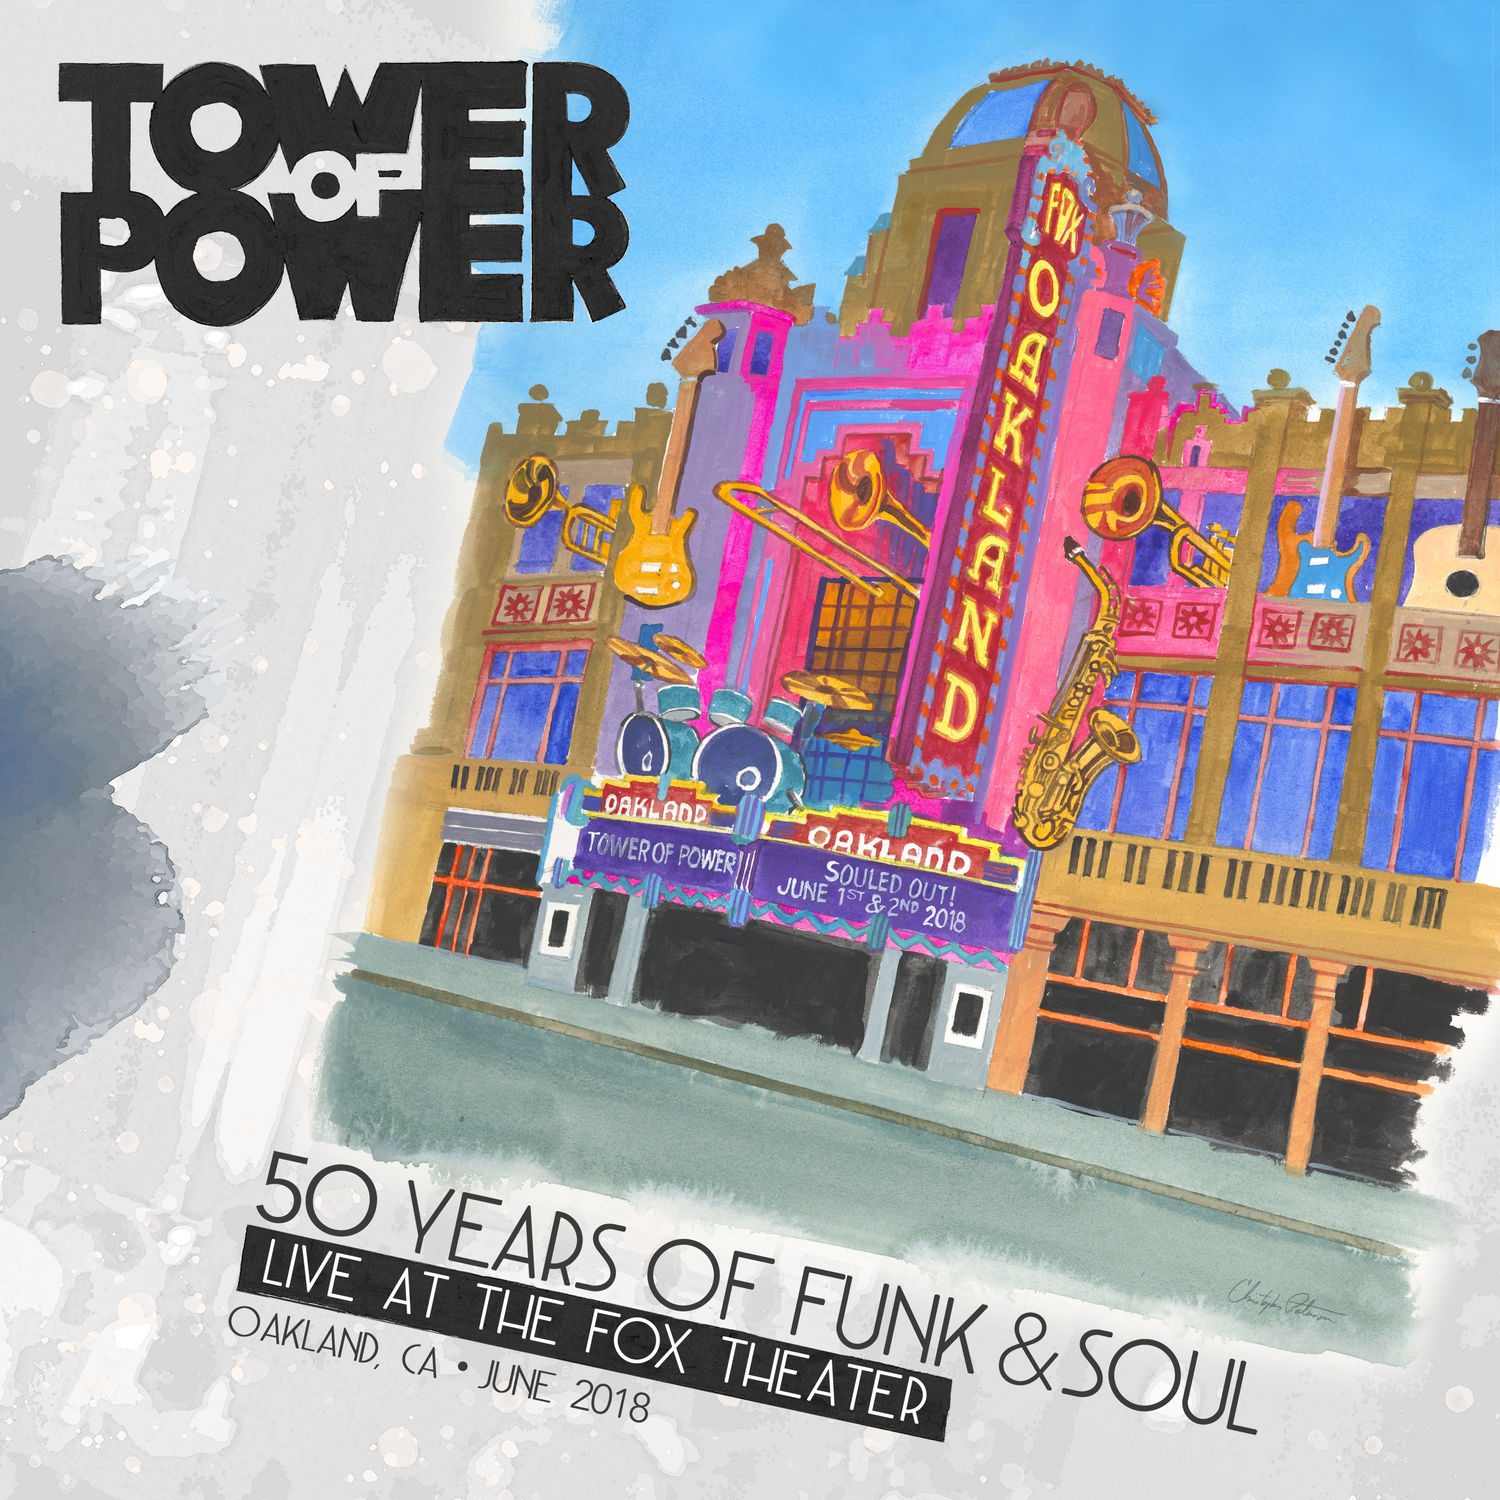 Tower Of Power – 50 Years of Funk & Soul Live at the Fox Theater-Oakland, CA – June 2018 (2021) [FLAC 24bit/96kHz]